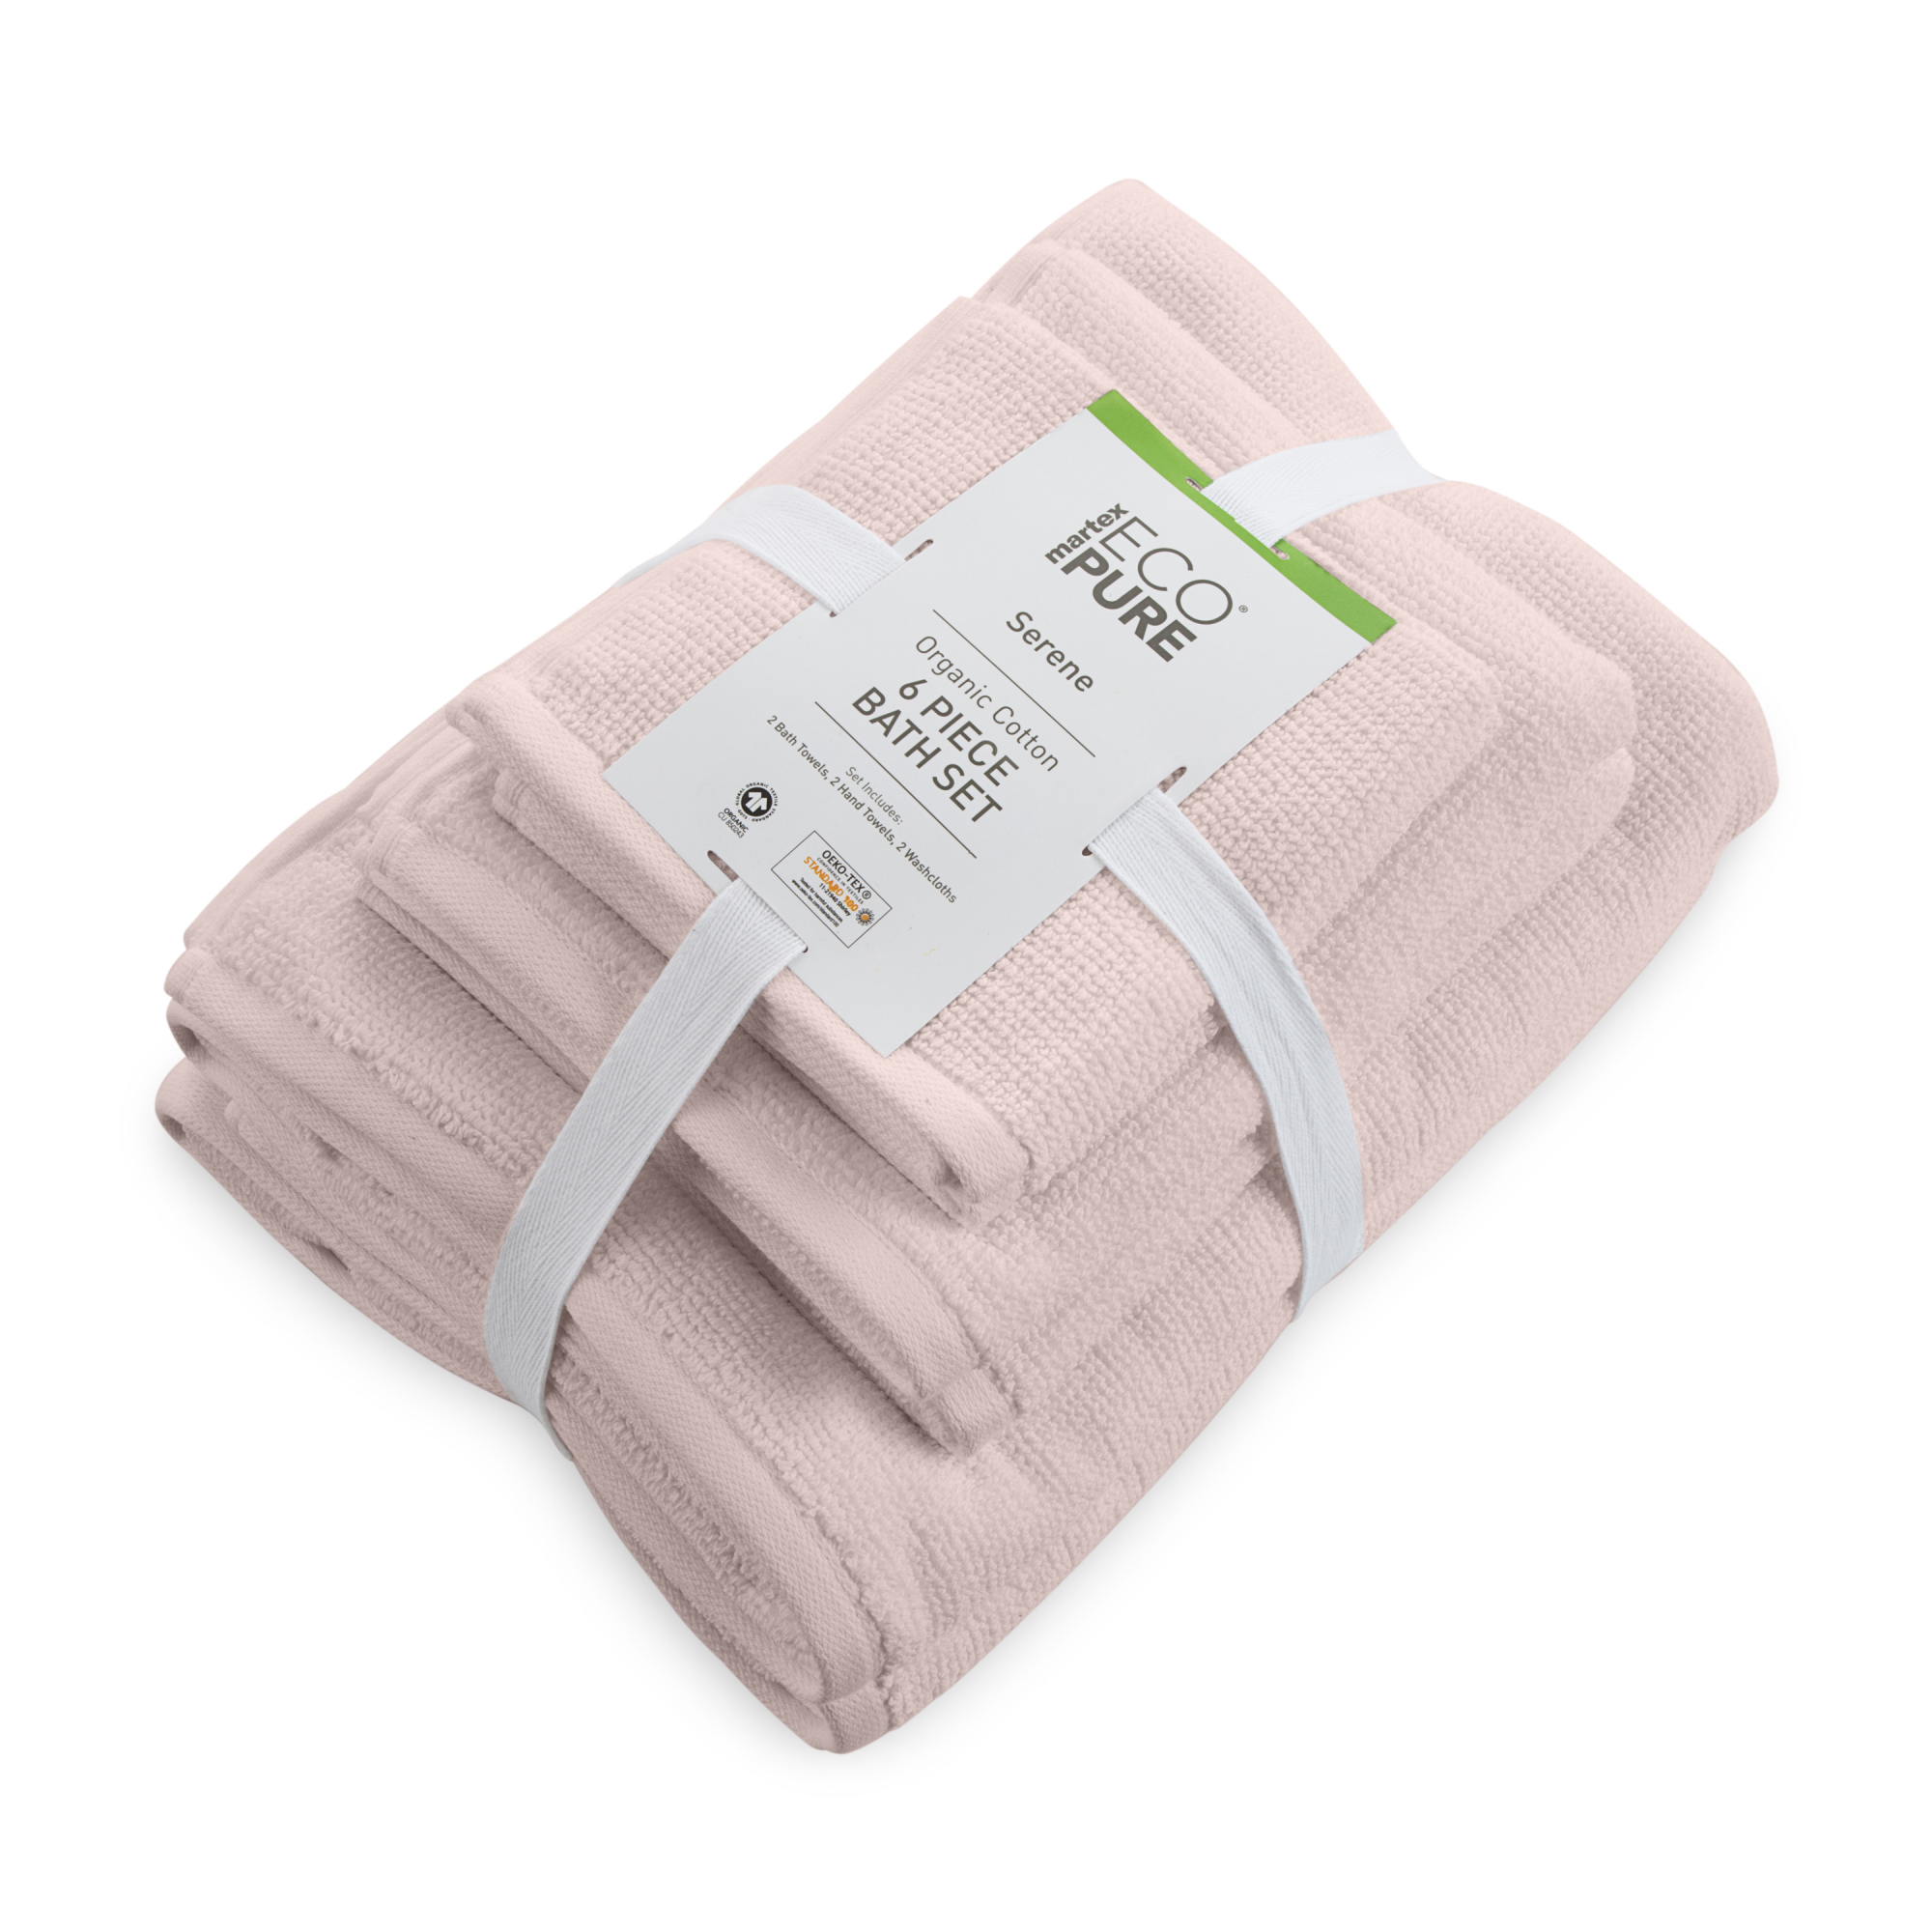 Organic Towel Collection for Pure Comfort